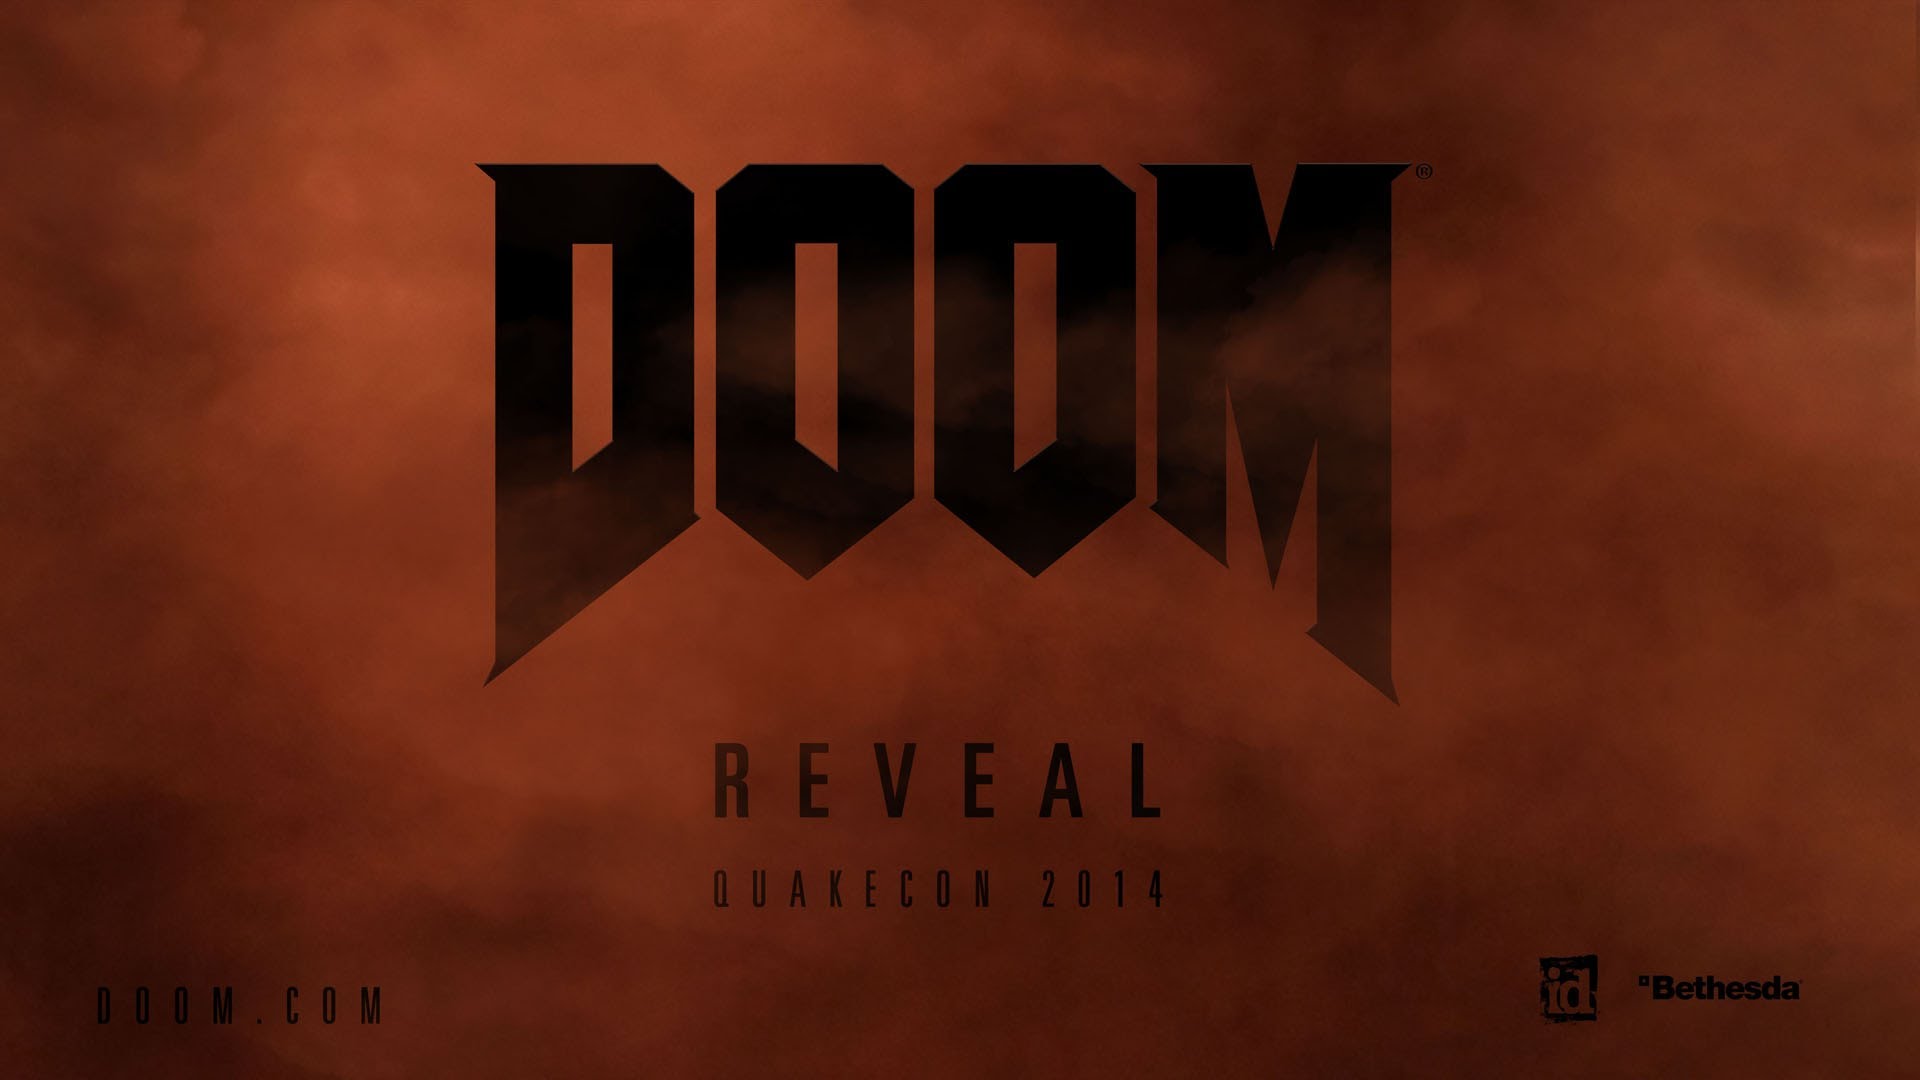 The new Doom teased at E3 is not Doom 4 but rather an entire series